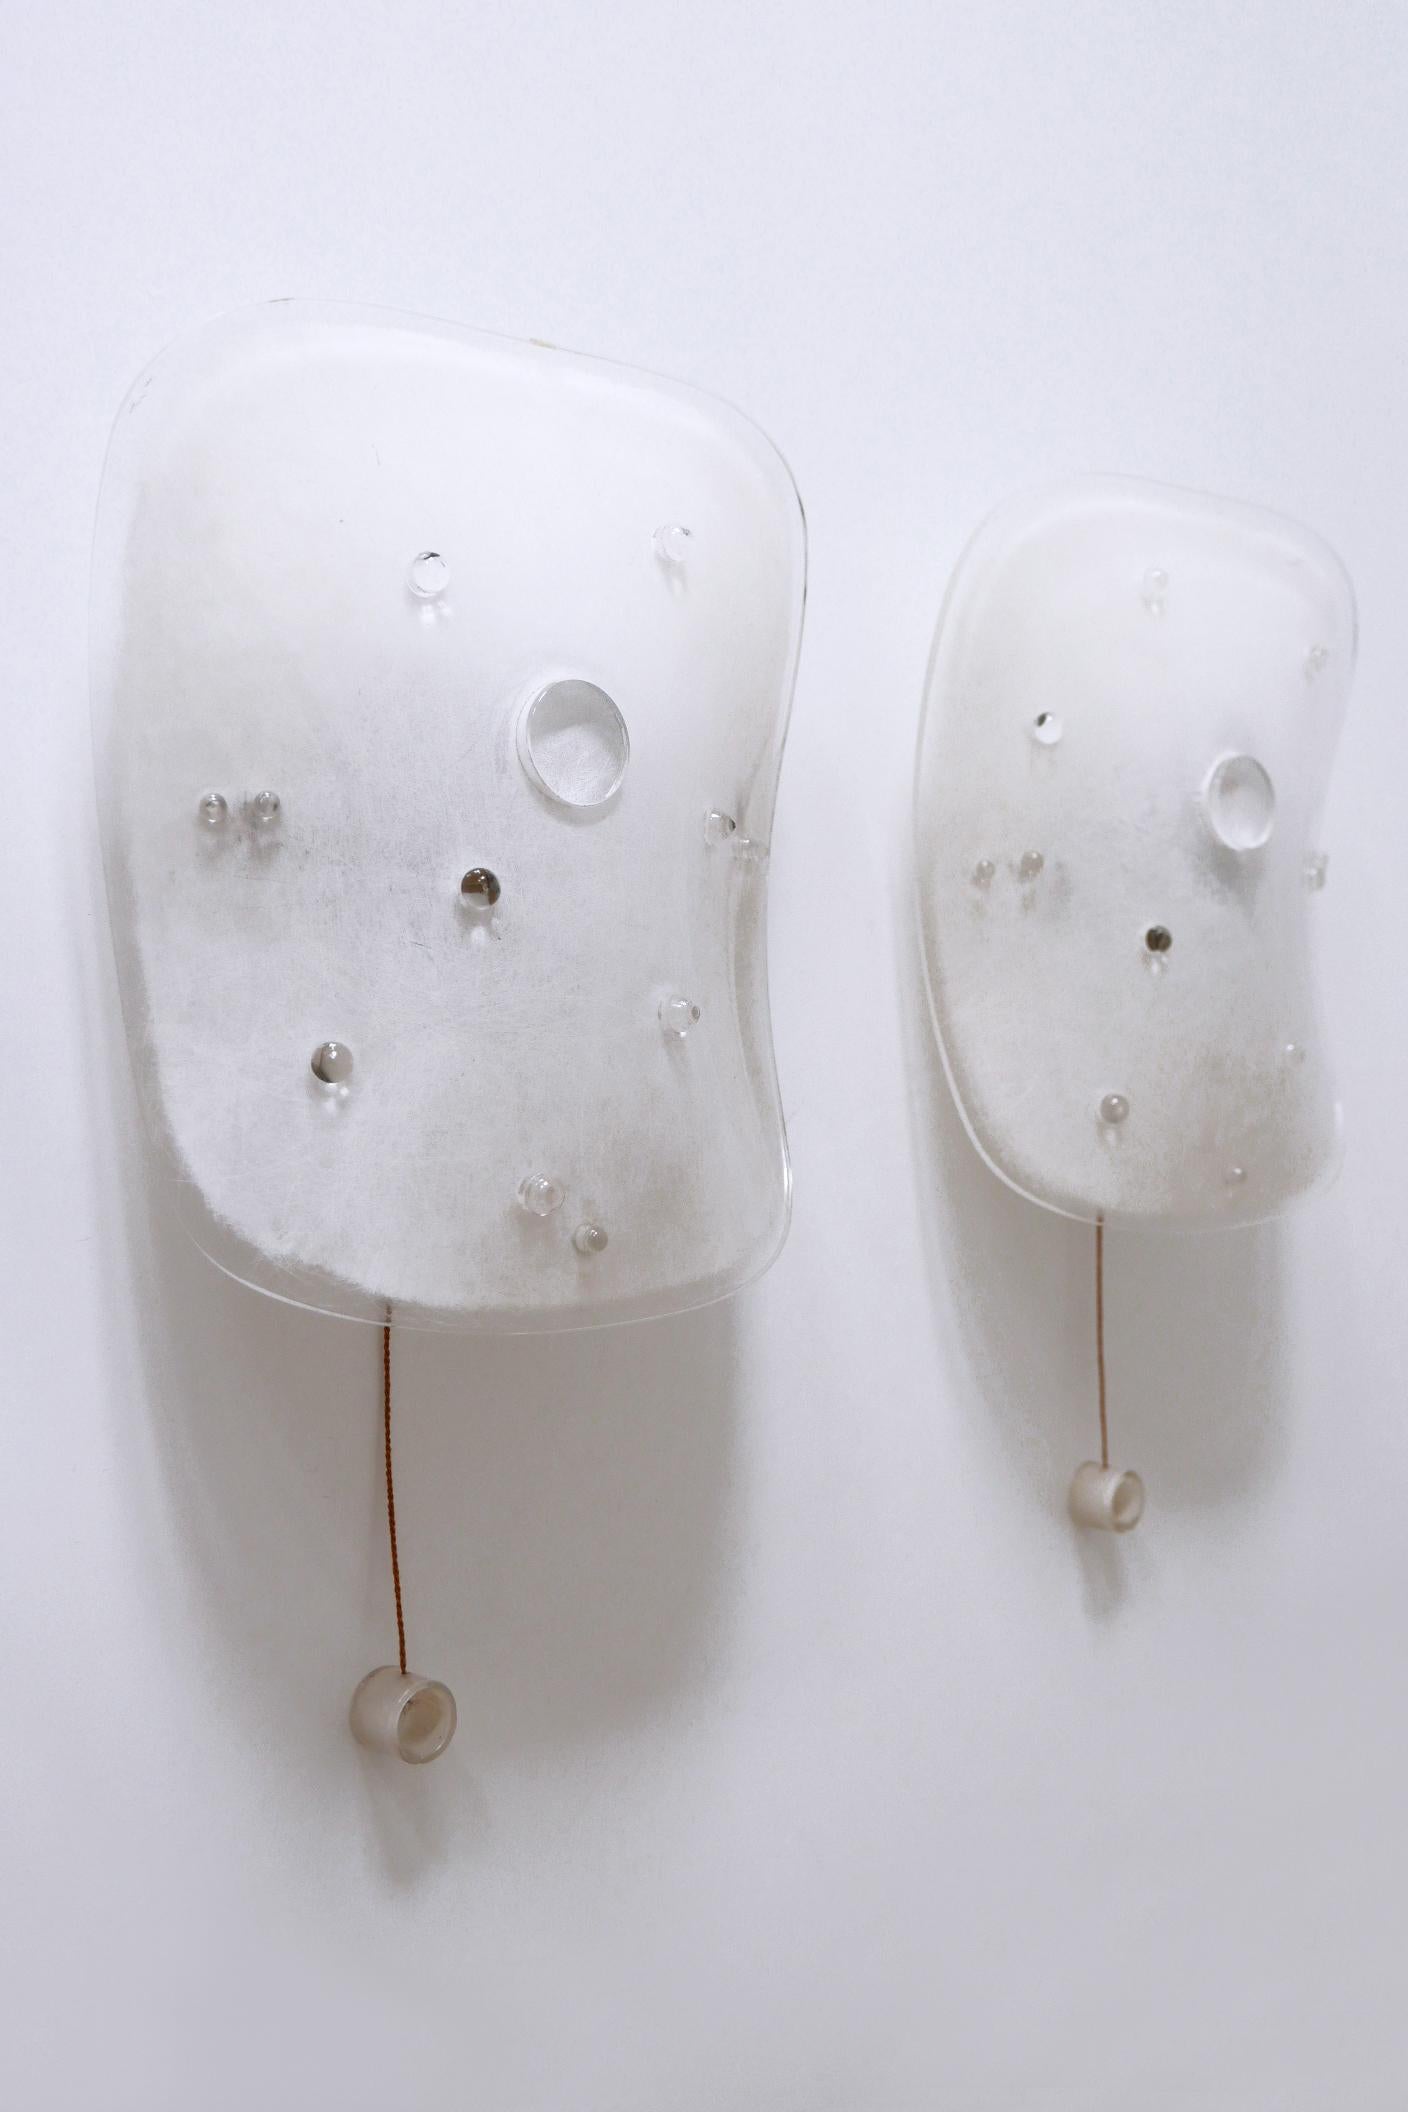 Austrian Set of Two Mid-Century Modern Lucite Wall Lamps Sconces by Rupert Nikoll, 1960s For Sale